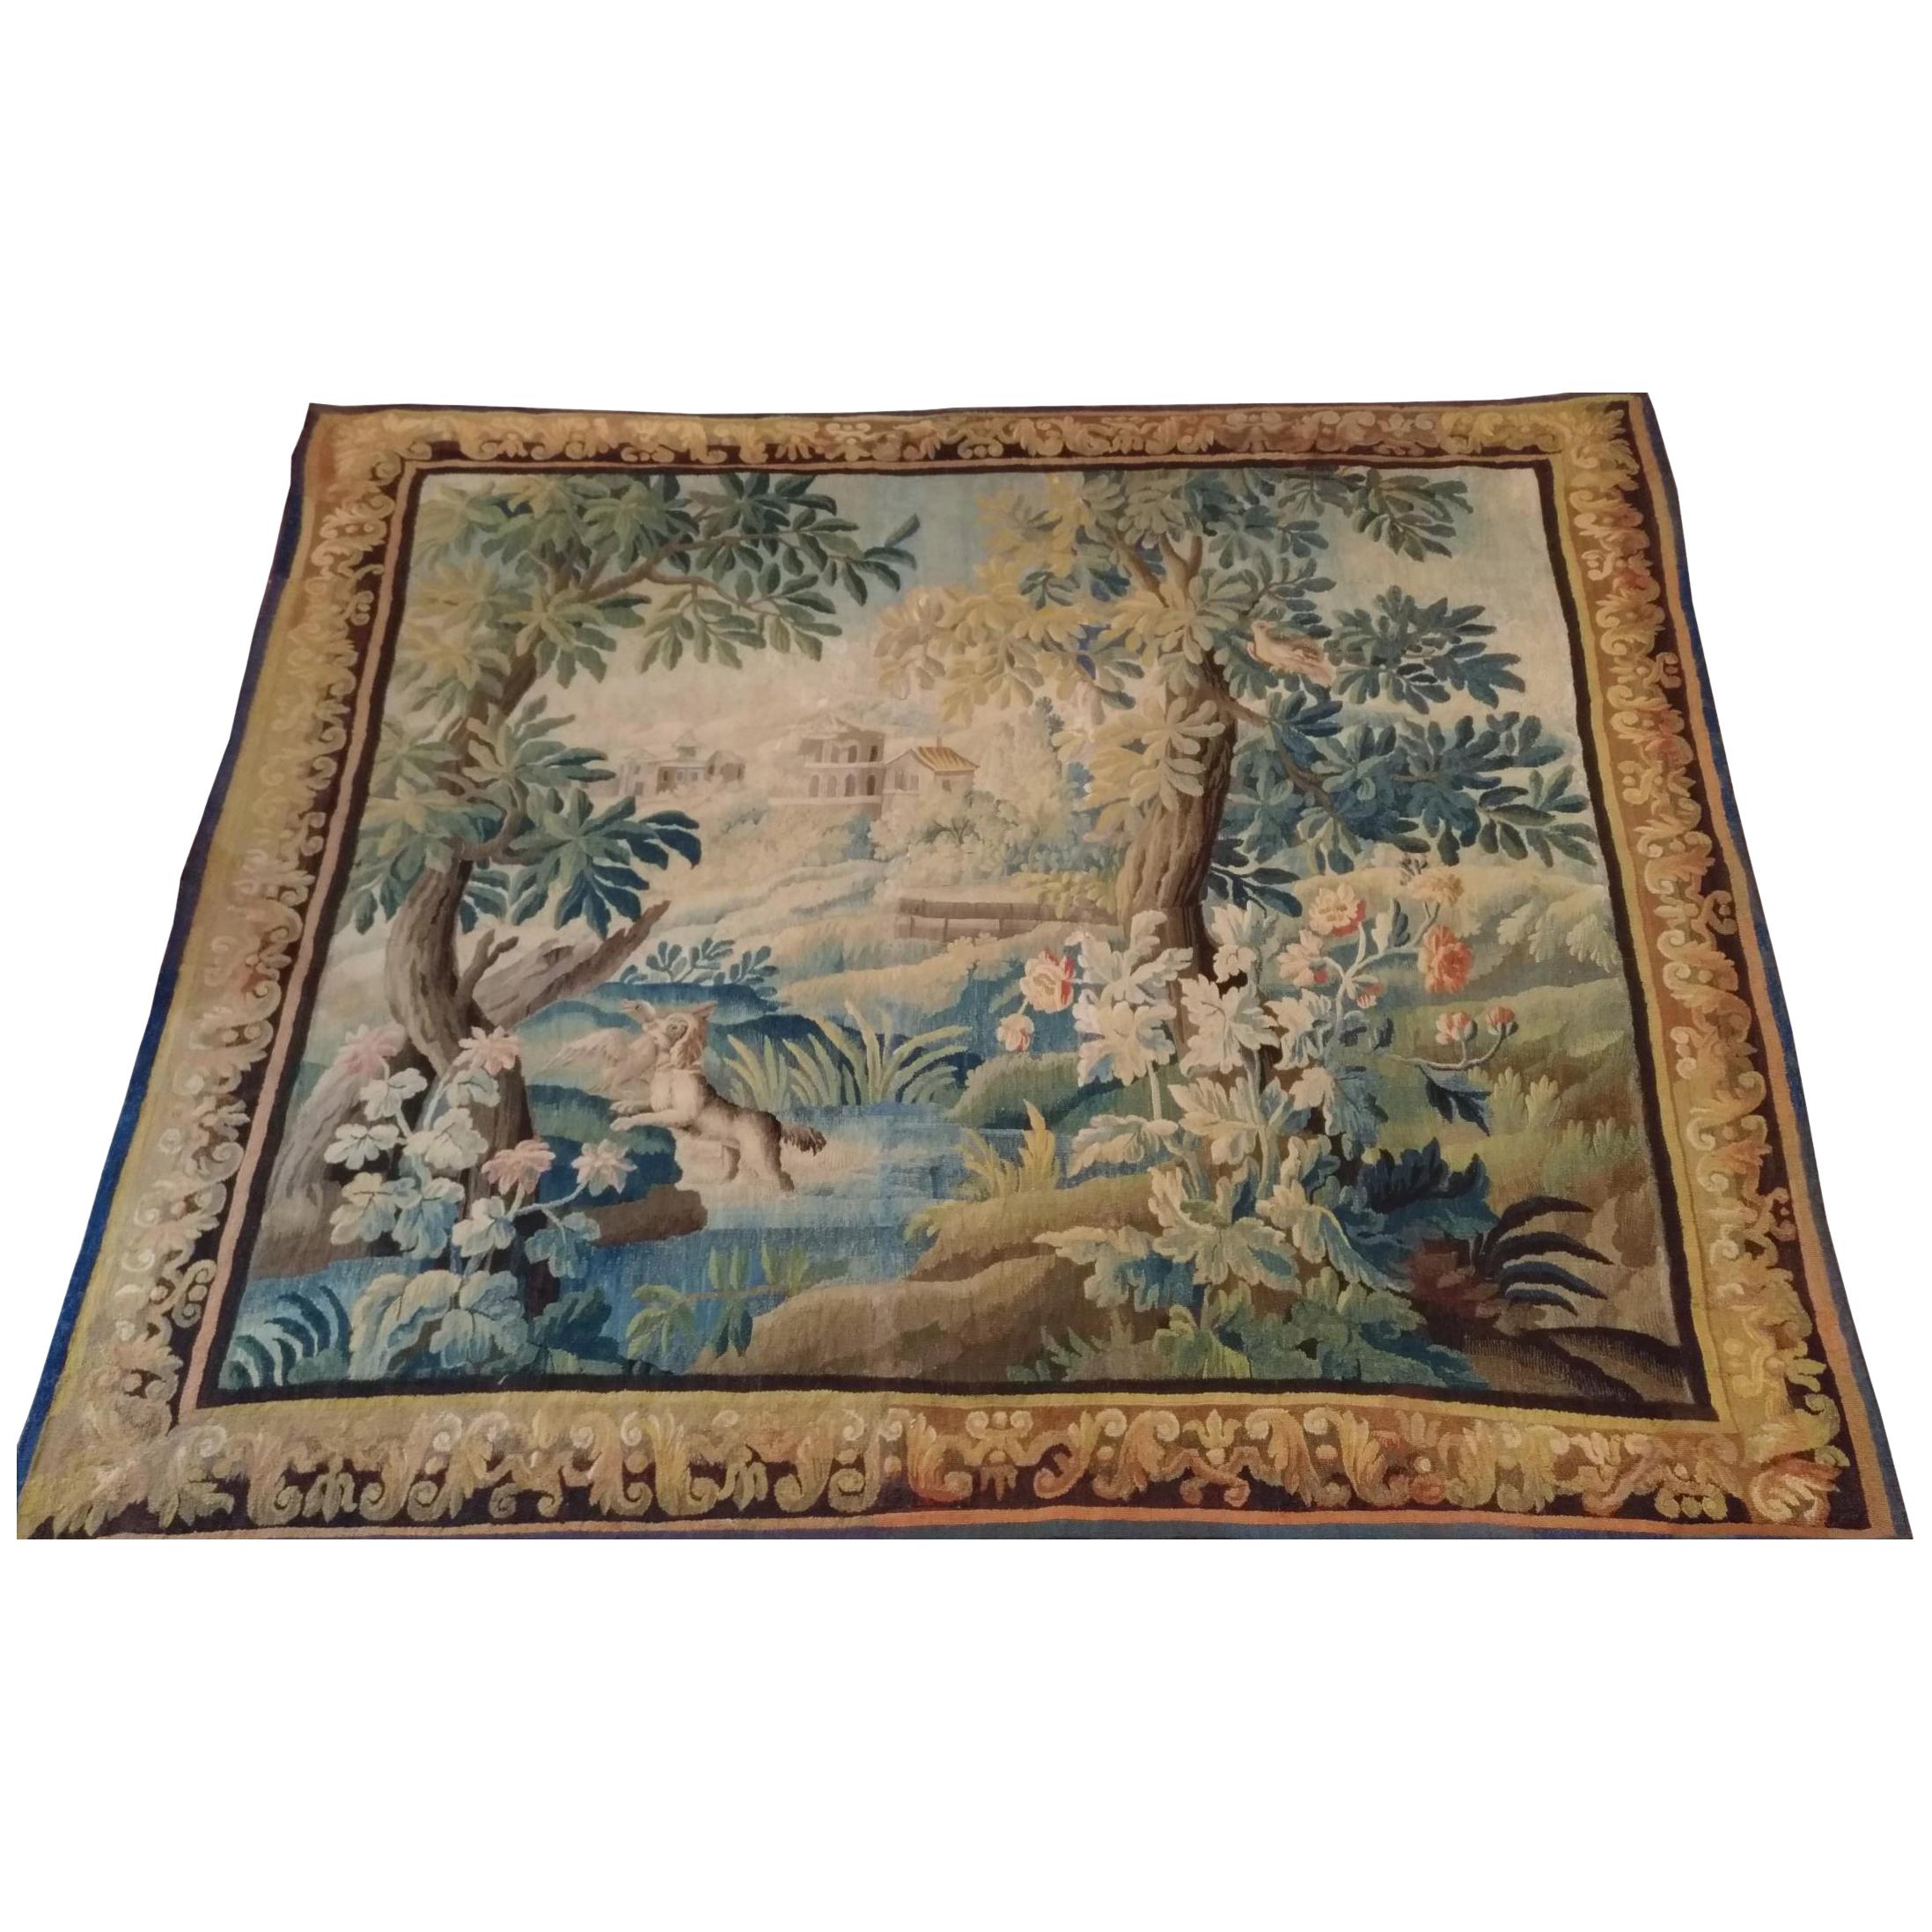 1026 - Wonderful Large 18th Century Fine French Aubusson Tapestry